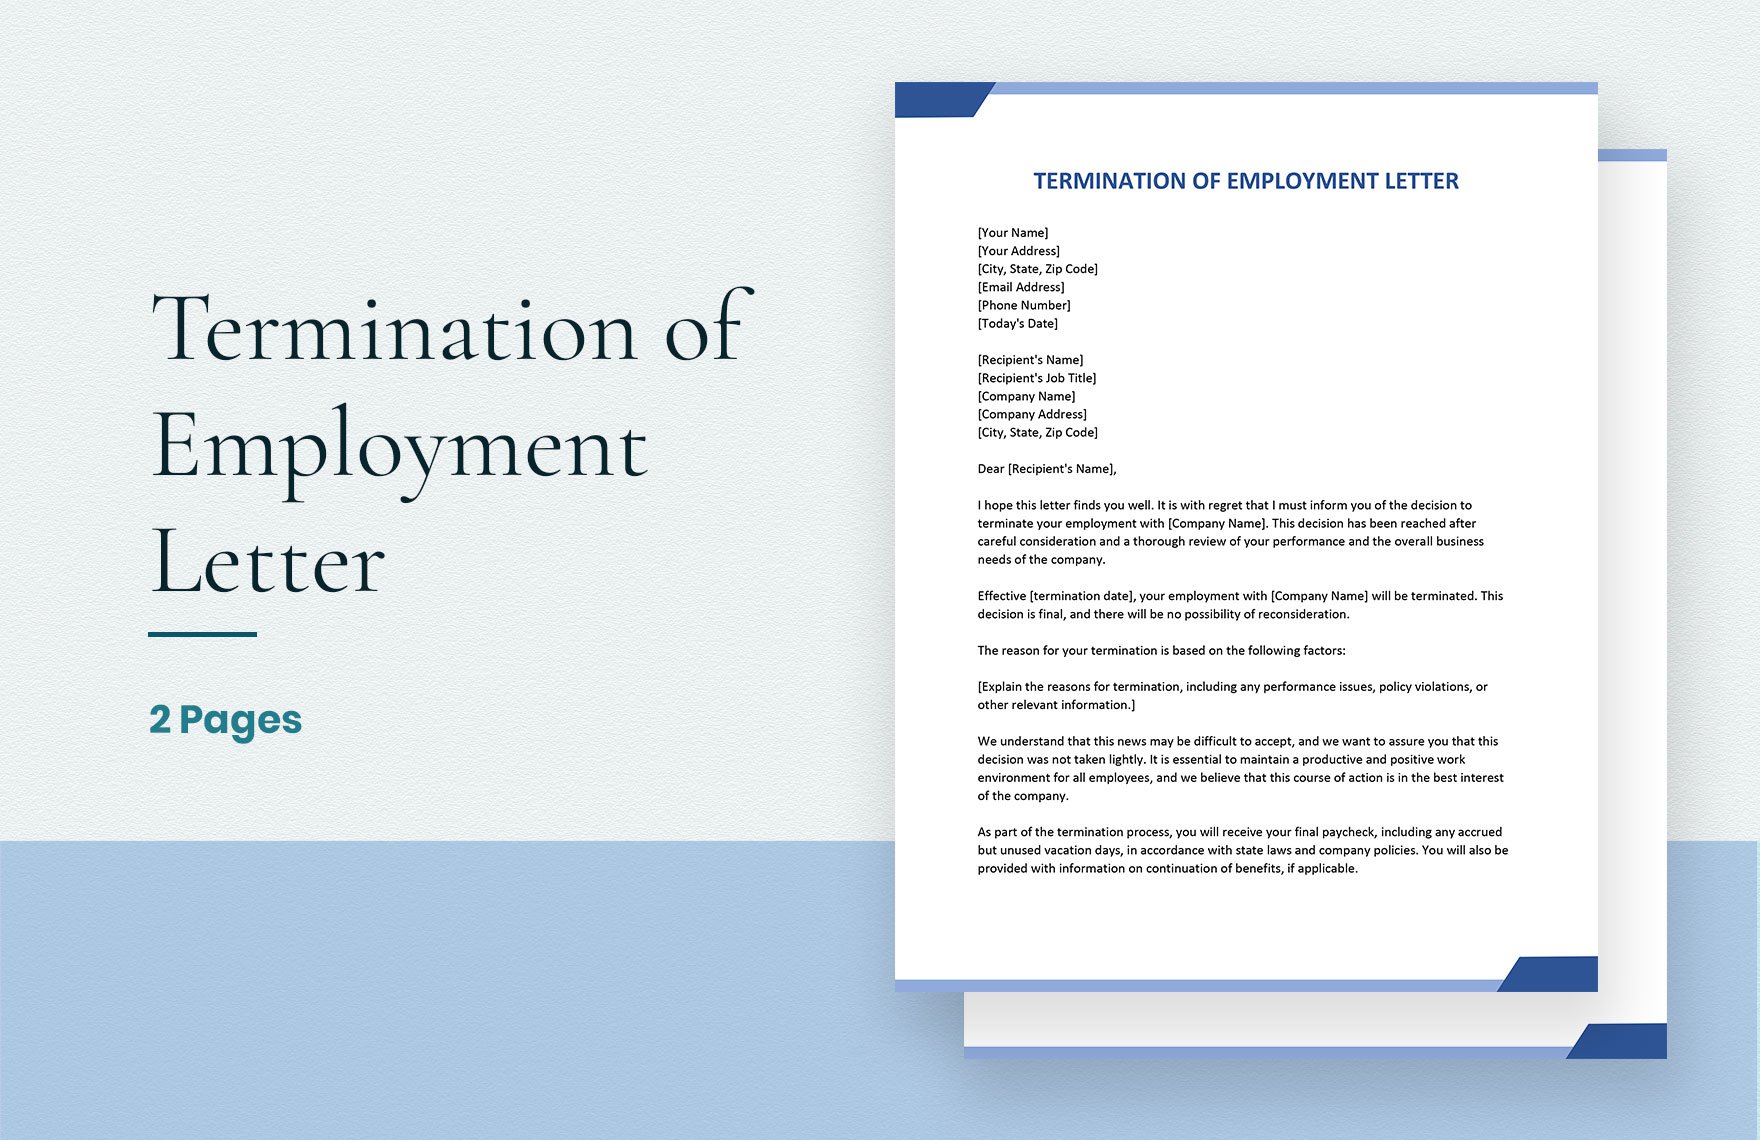 Termination of Employment Letter